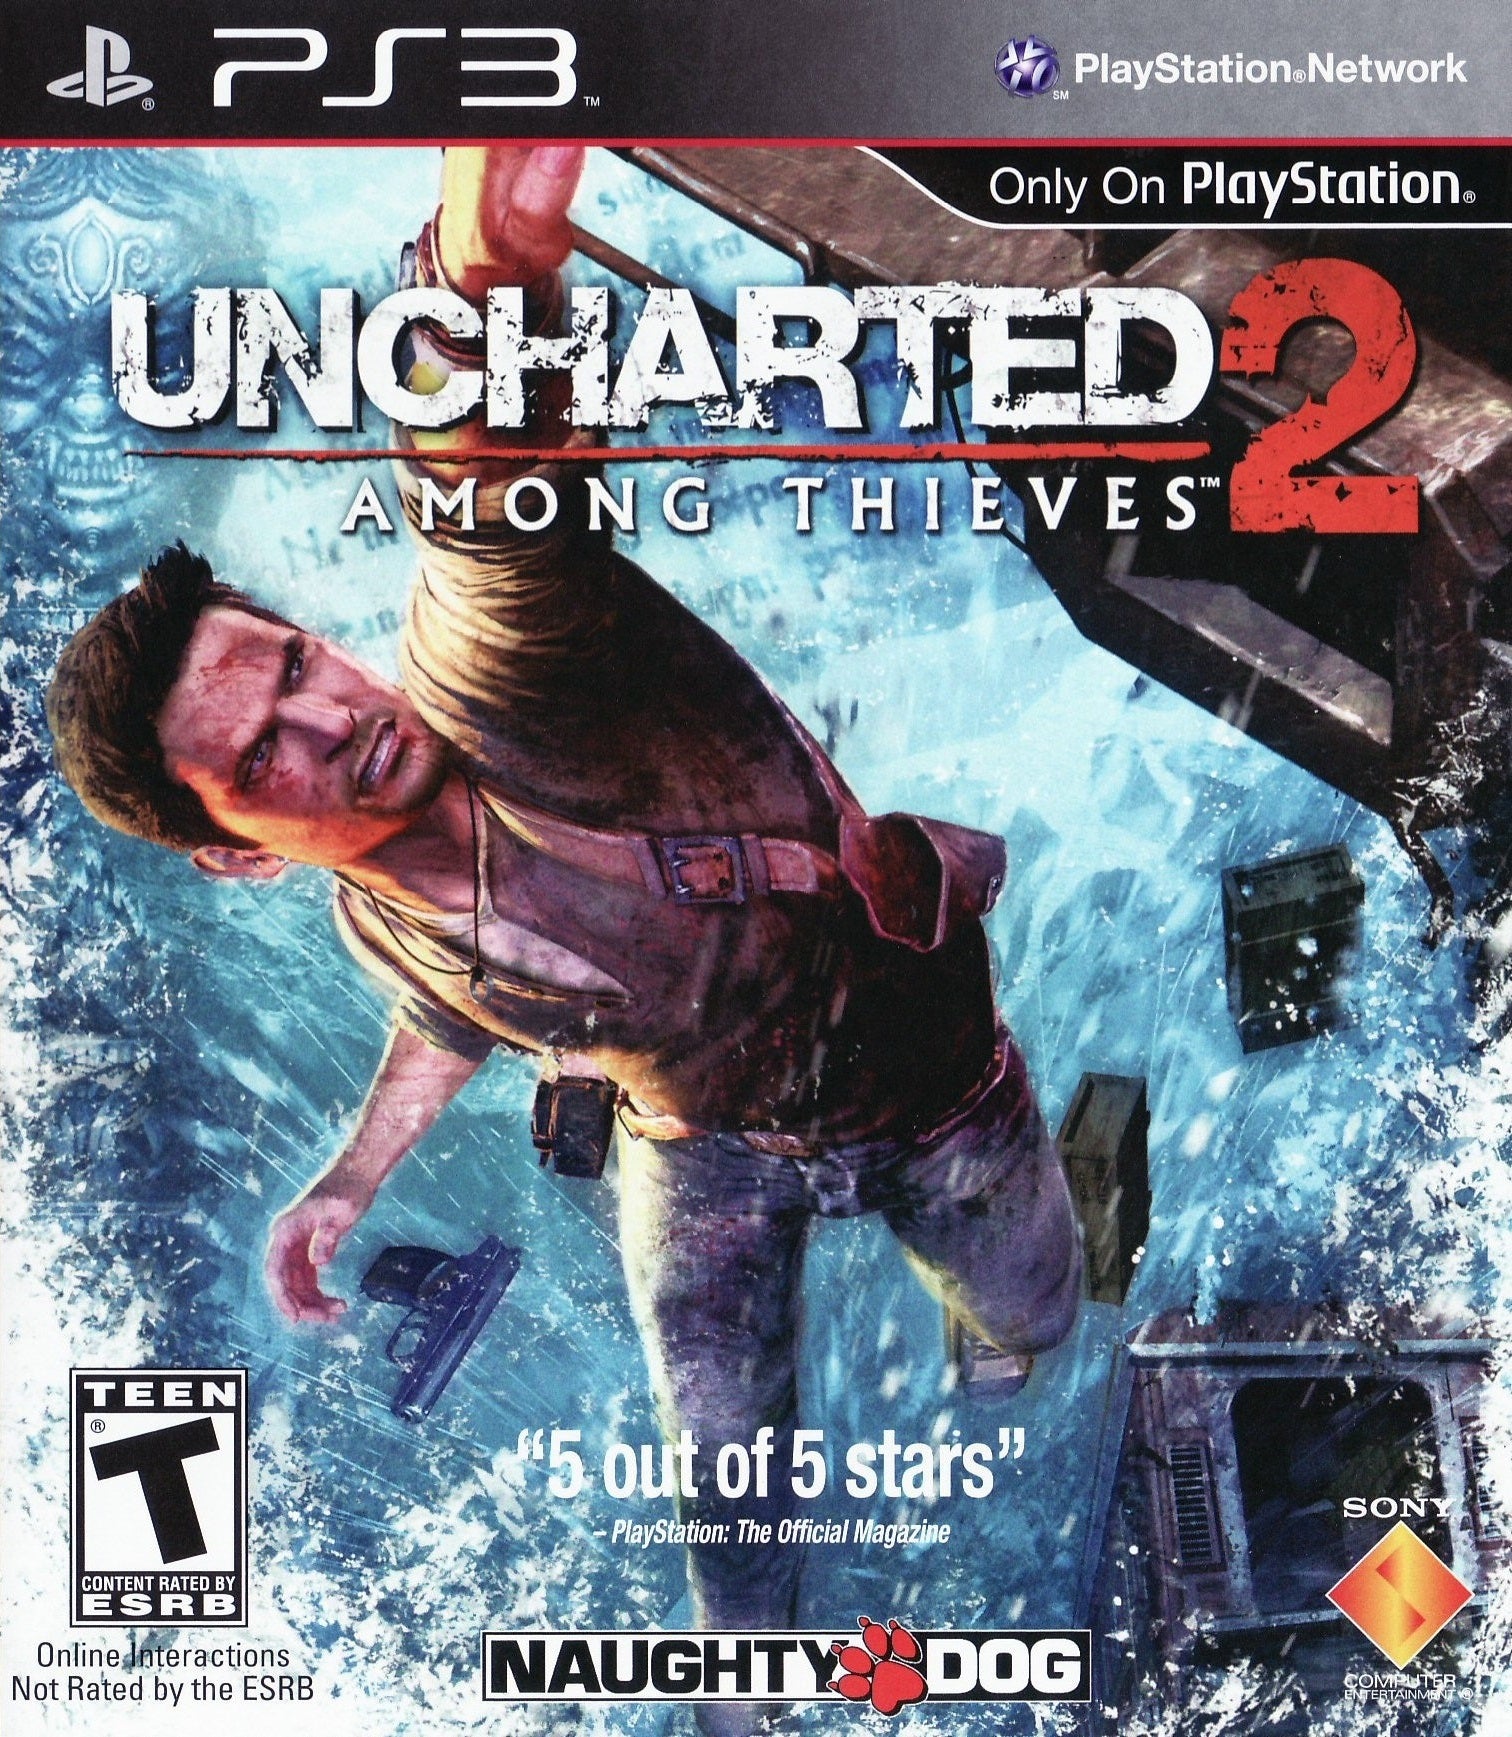 Uncharted 2: Among Thieves - PlayStation 3 (PS3) Game